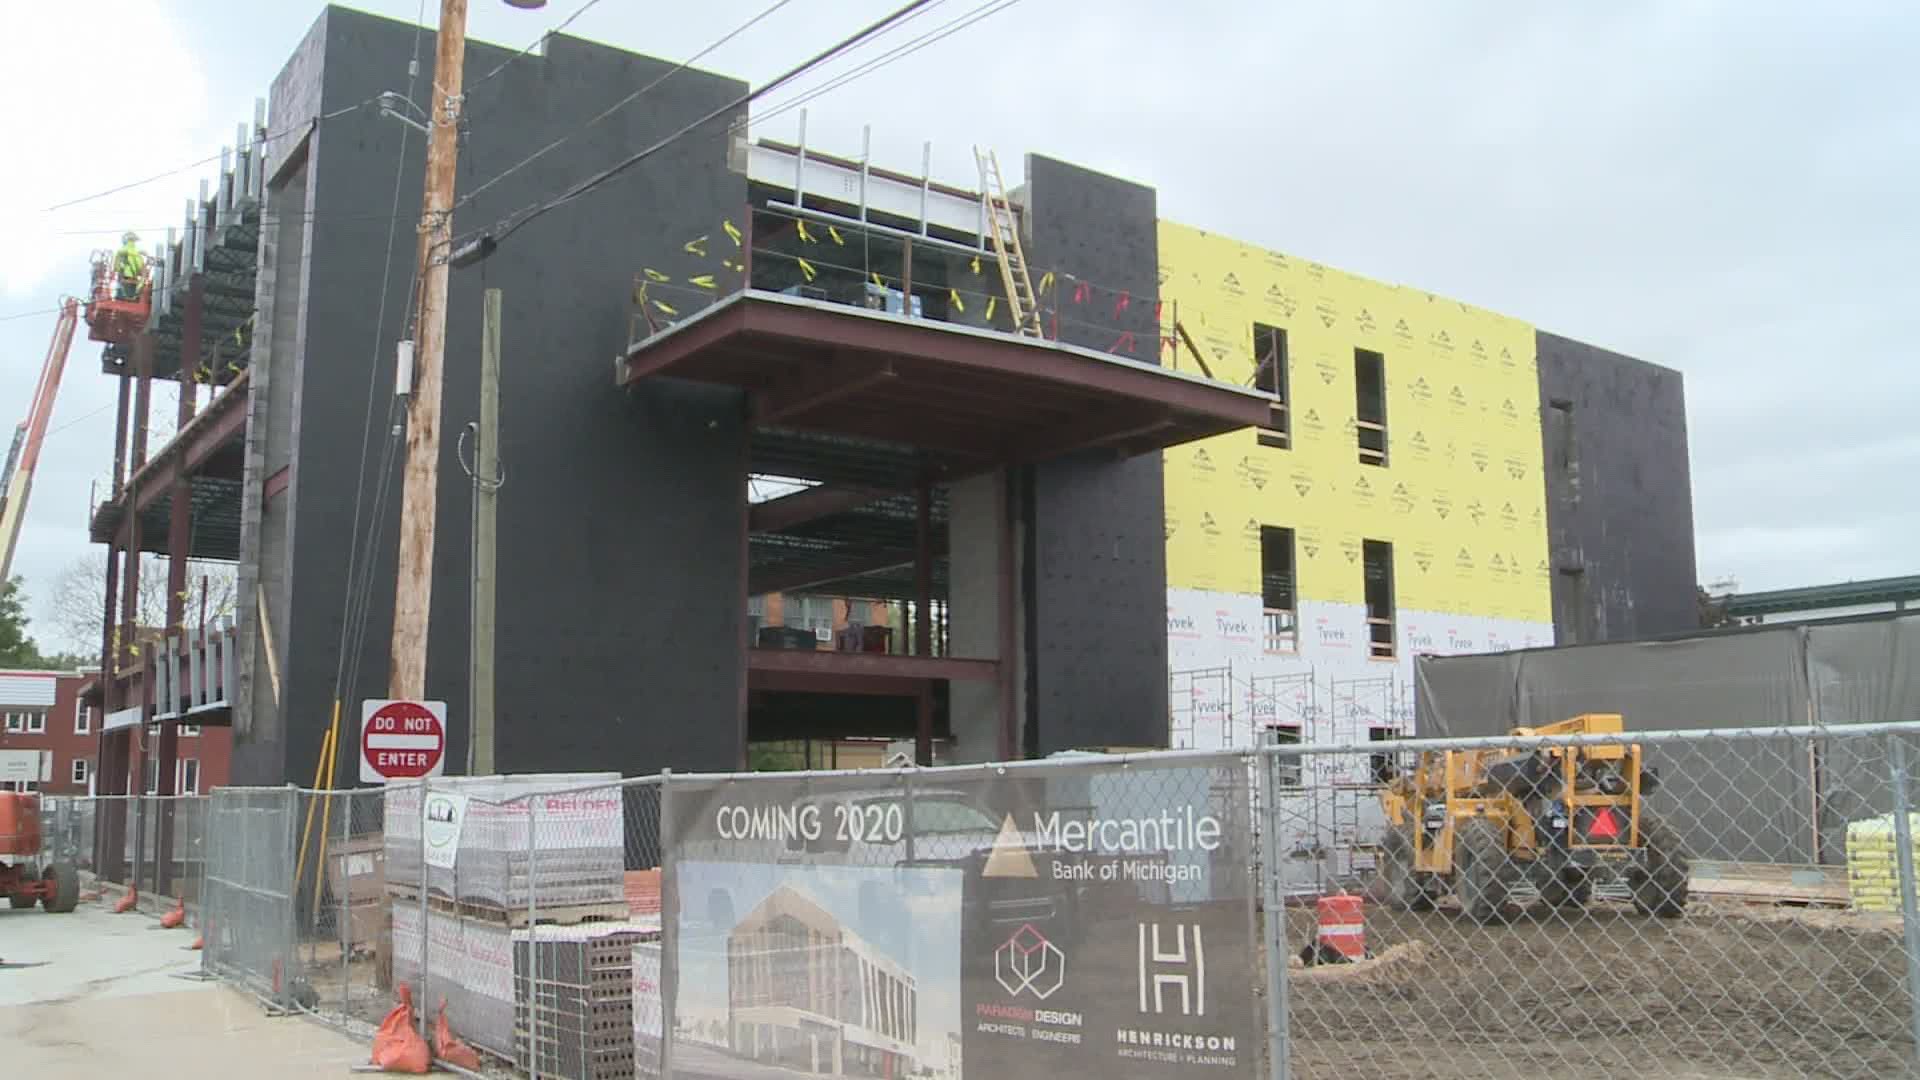 The $5 million, multi-use building will be completed early next year.